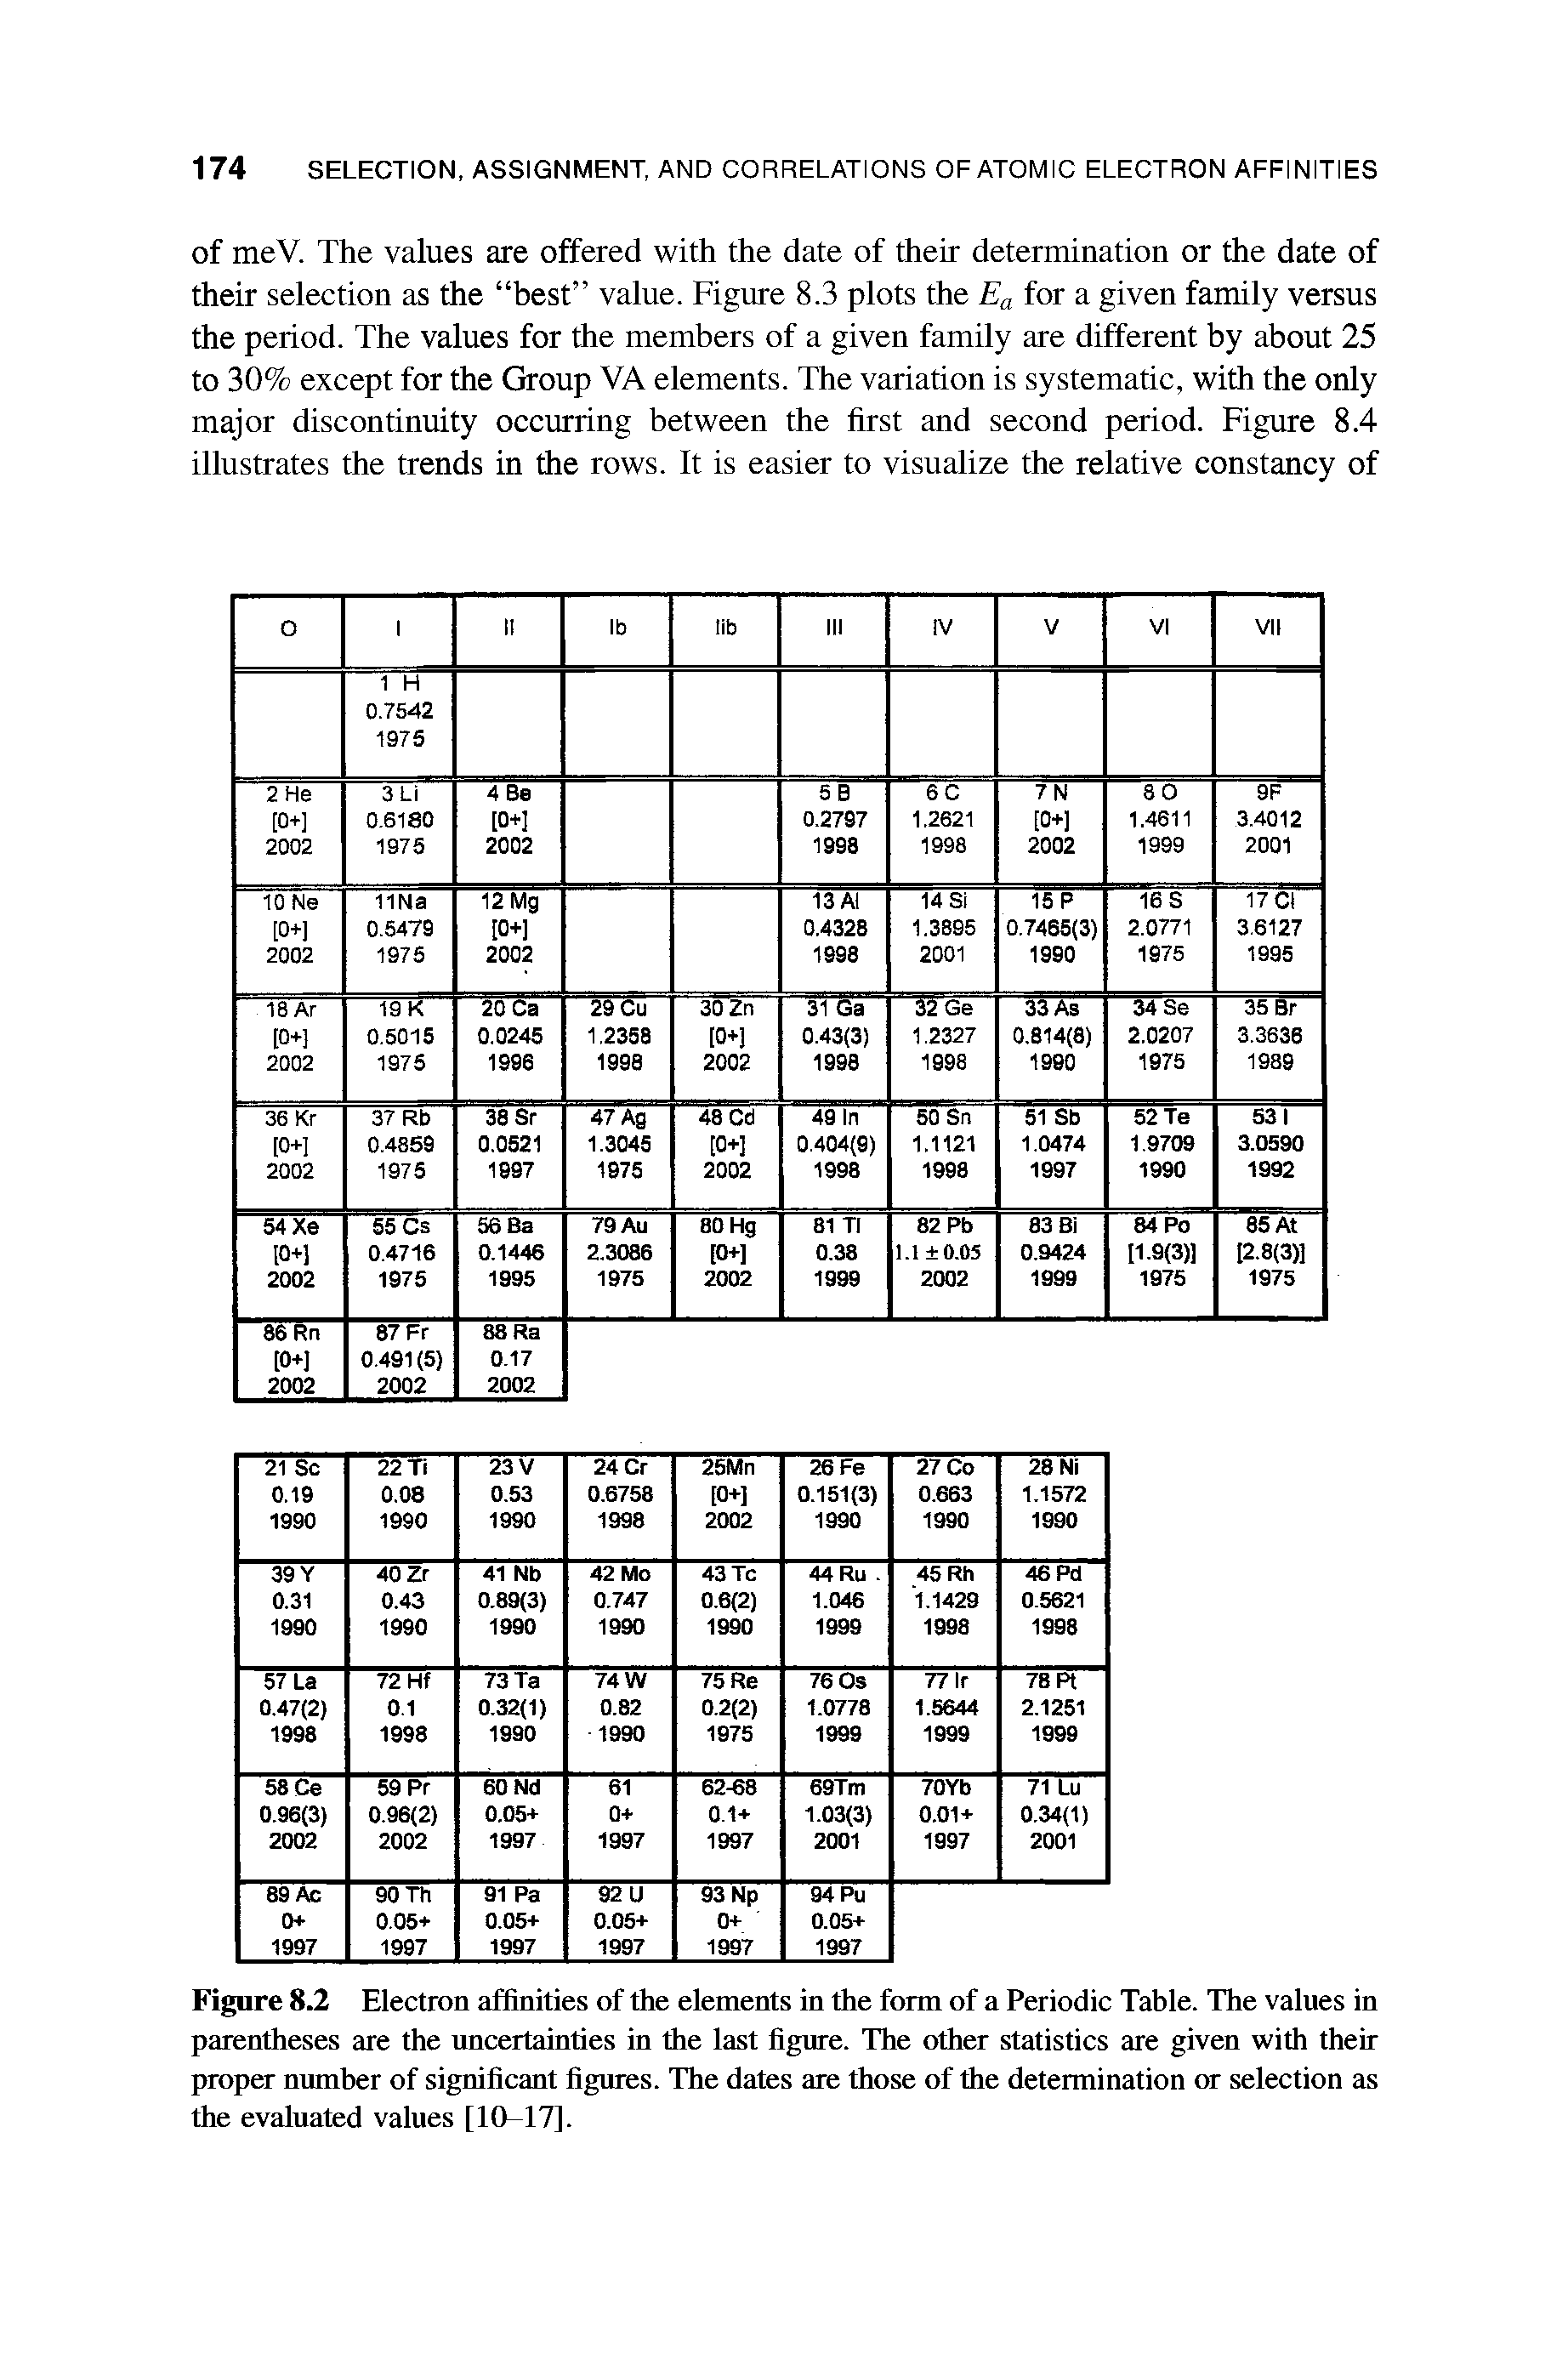 Figure 8.2 Electron affinities of the elements in the form of a Periodic Table. The values in parentheses are the uncertainties in the last figure. The other statistics are given with their proper number of significant figures. The dates are those of the determination or selection as the evaluated values [10-17].